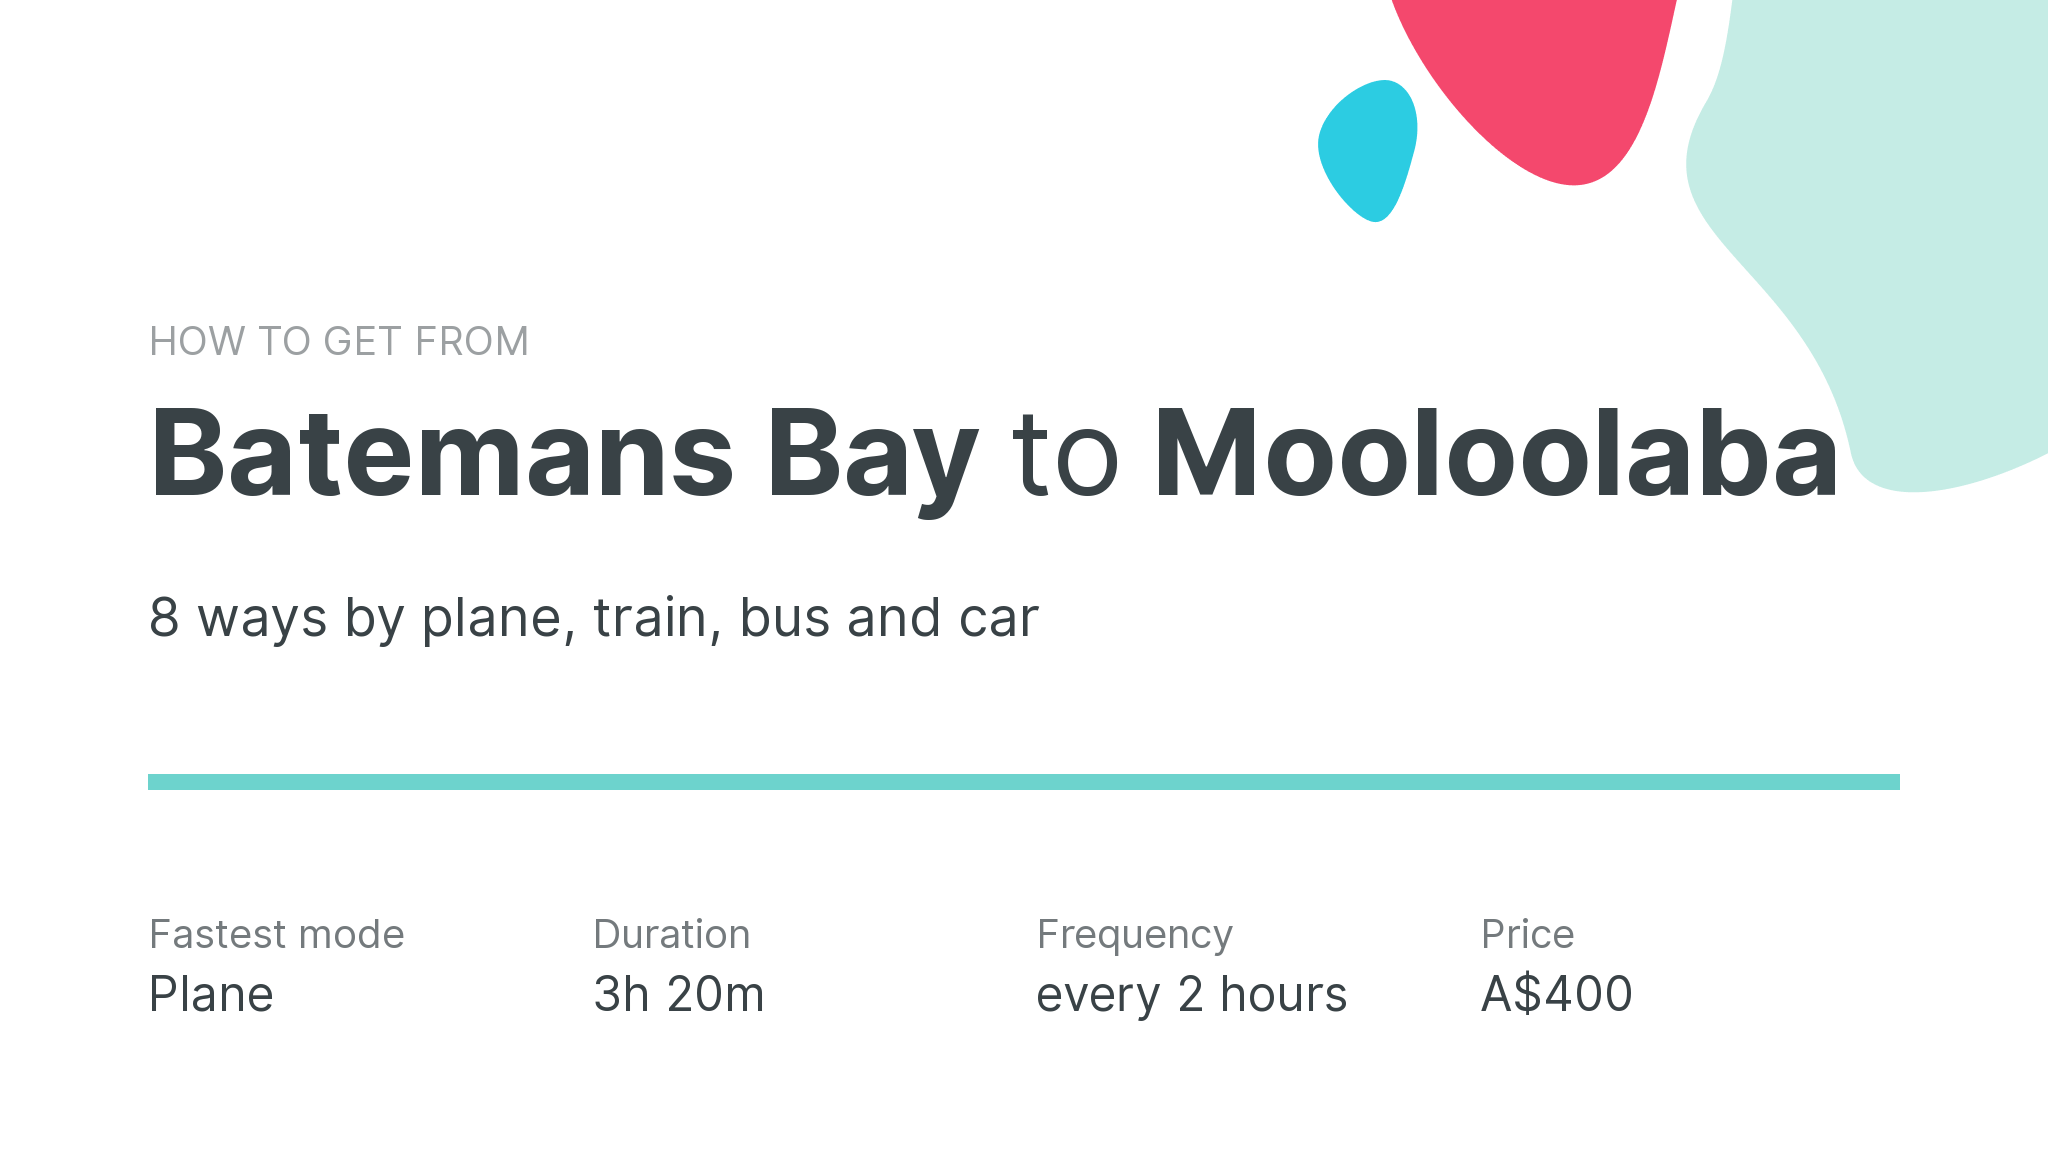 How do I get from Batemans Bay to Mooloolaba